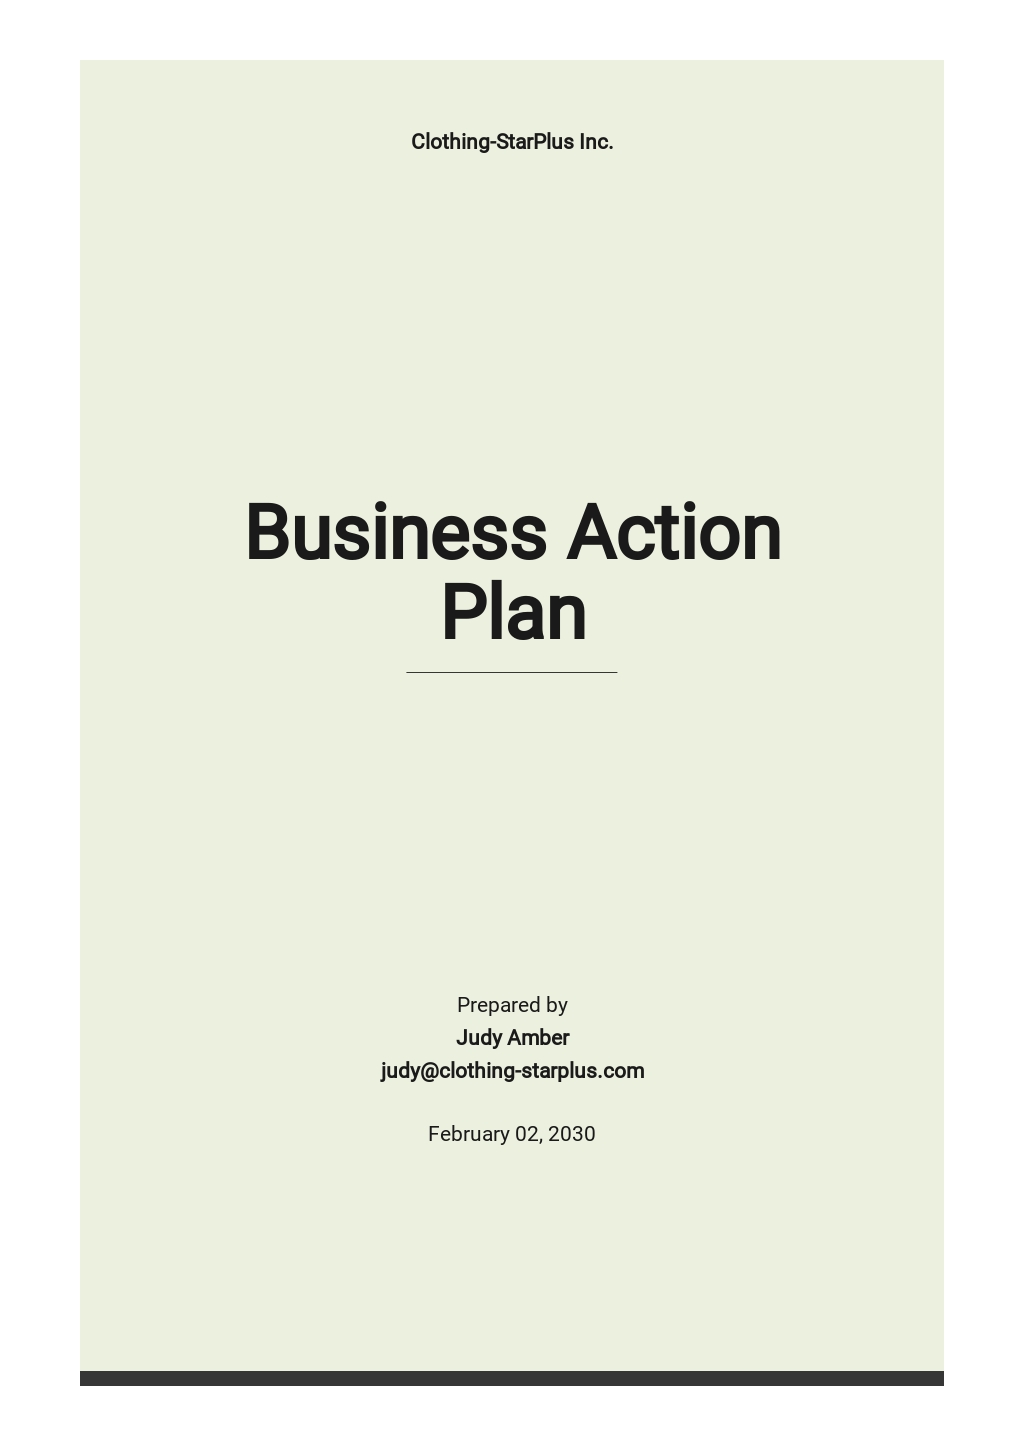  90 Day Business Action Plan Template